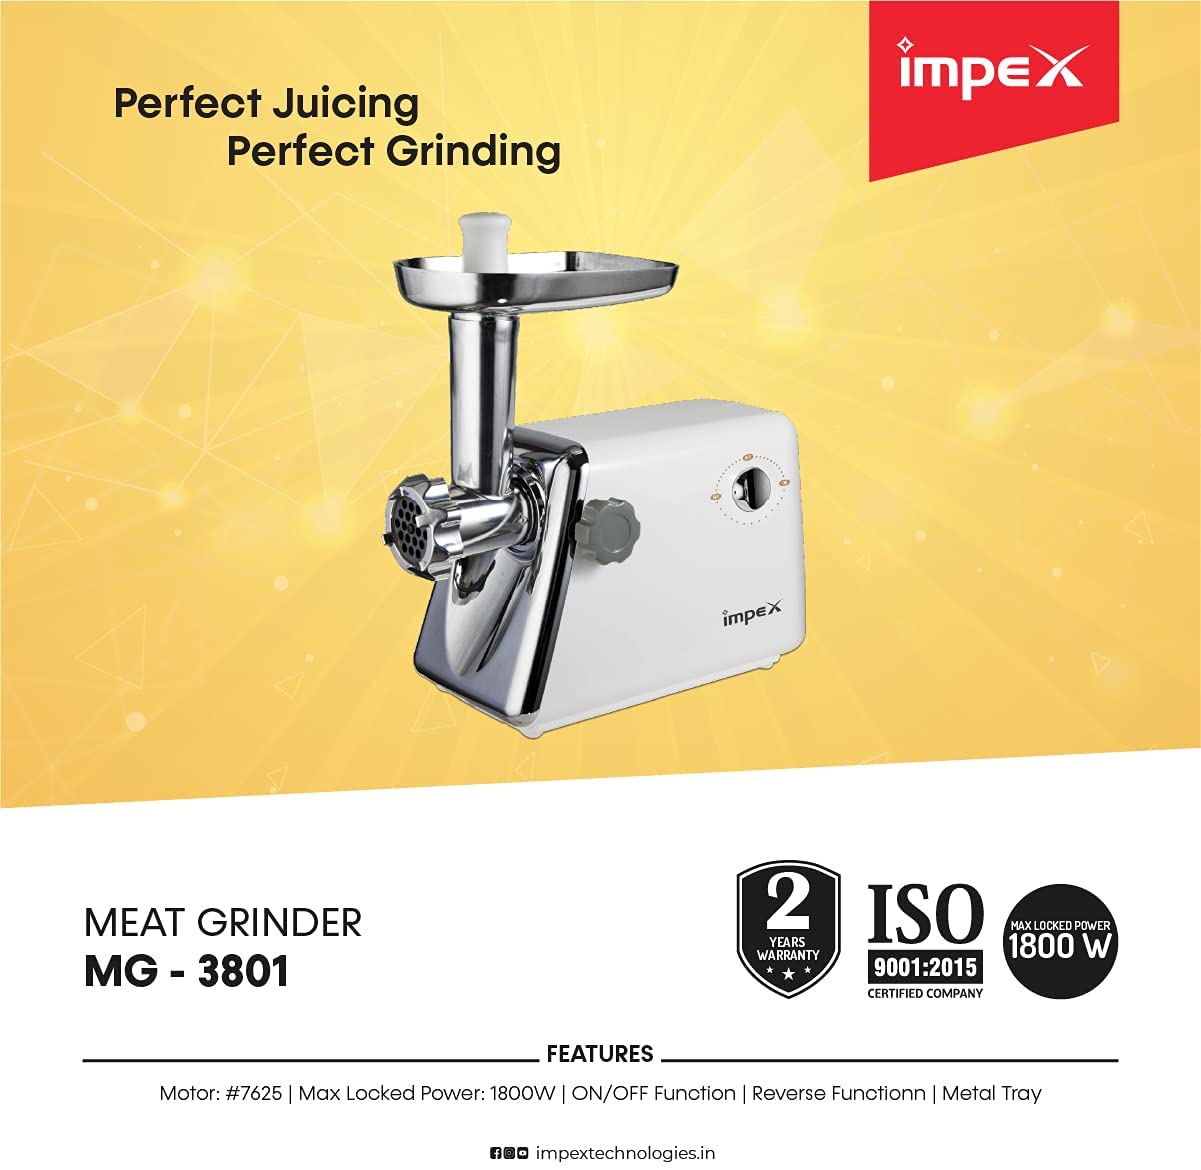 Impex MG 3801 1800W Meat Grinder with Sausage Stuffer, Keema Maker, Stainless Steel Blade, 2 Cutting plates 2 Years Warranty, White